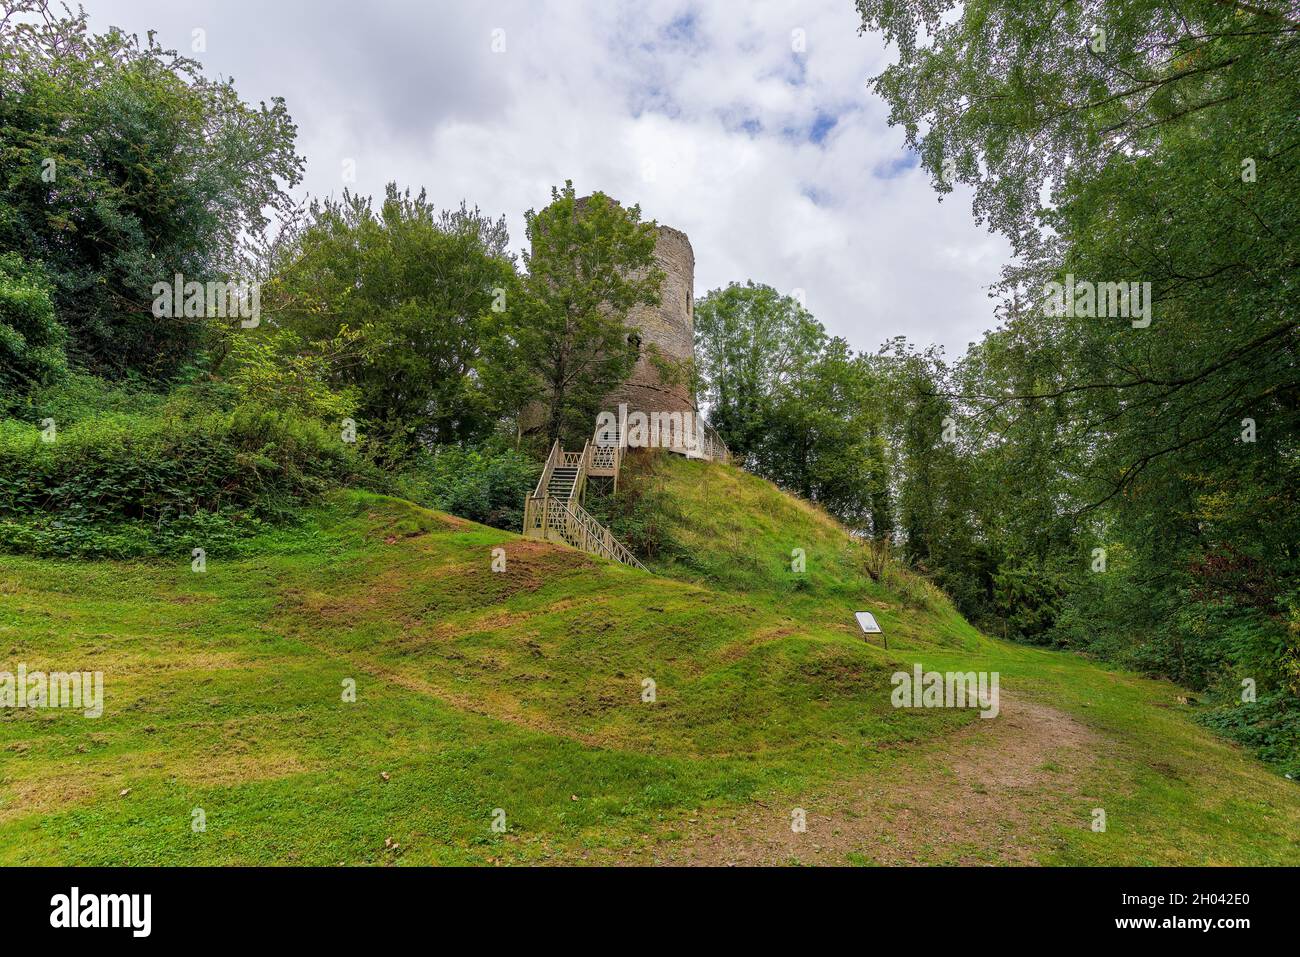 The historic castle at Bronllys, mid Wales. Stock Photo